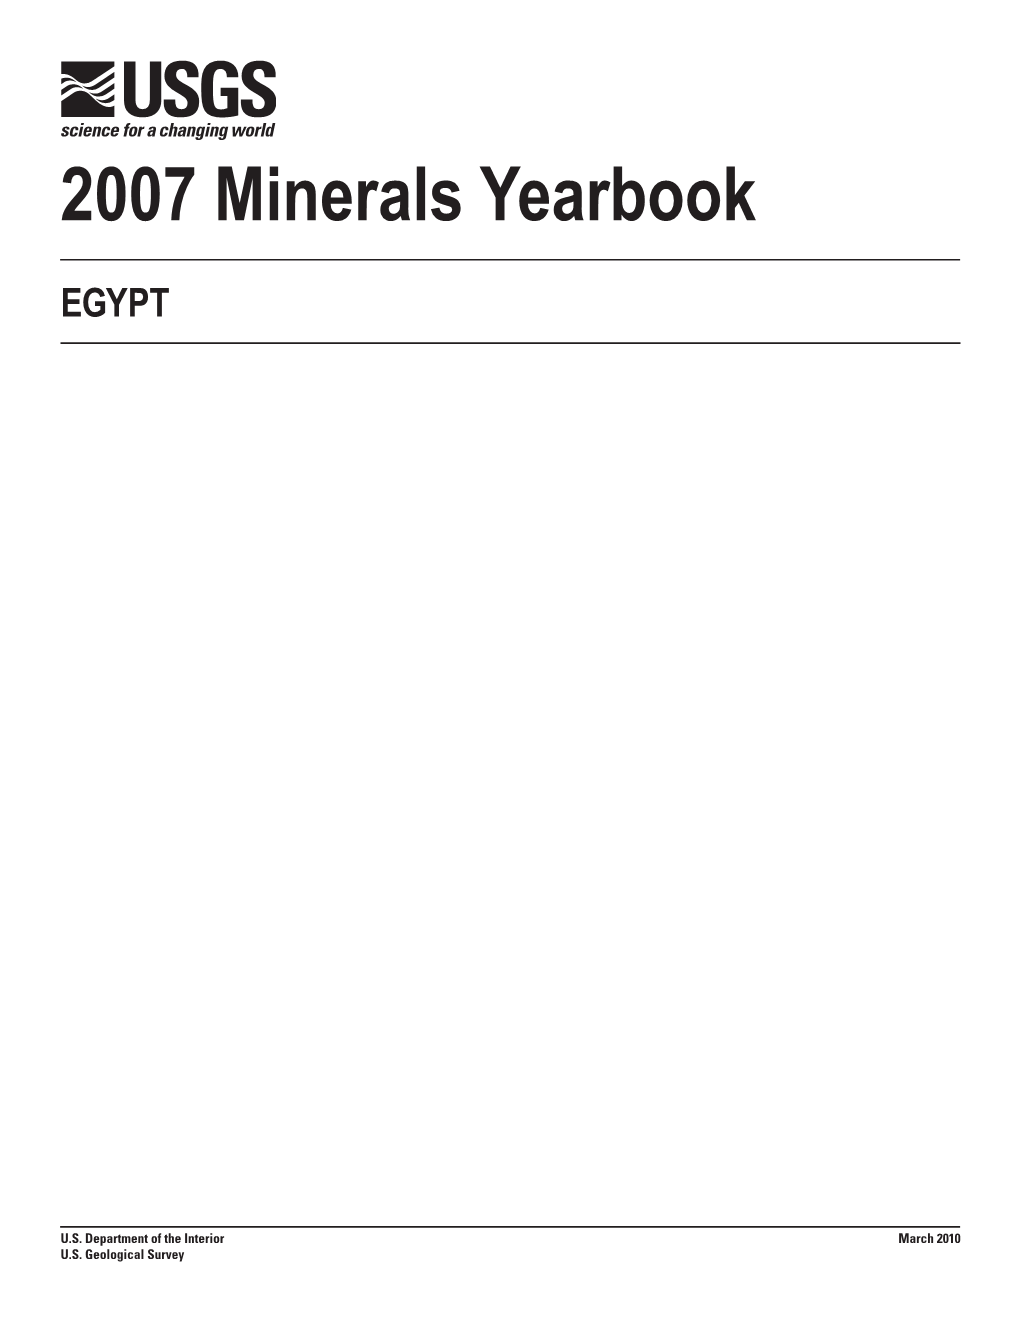 The Mineral Industry of Egypt in 2007